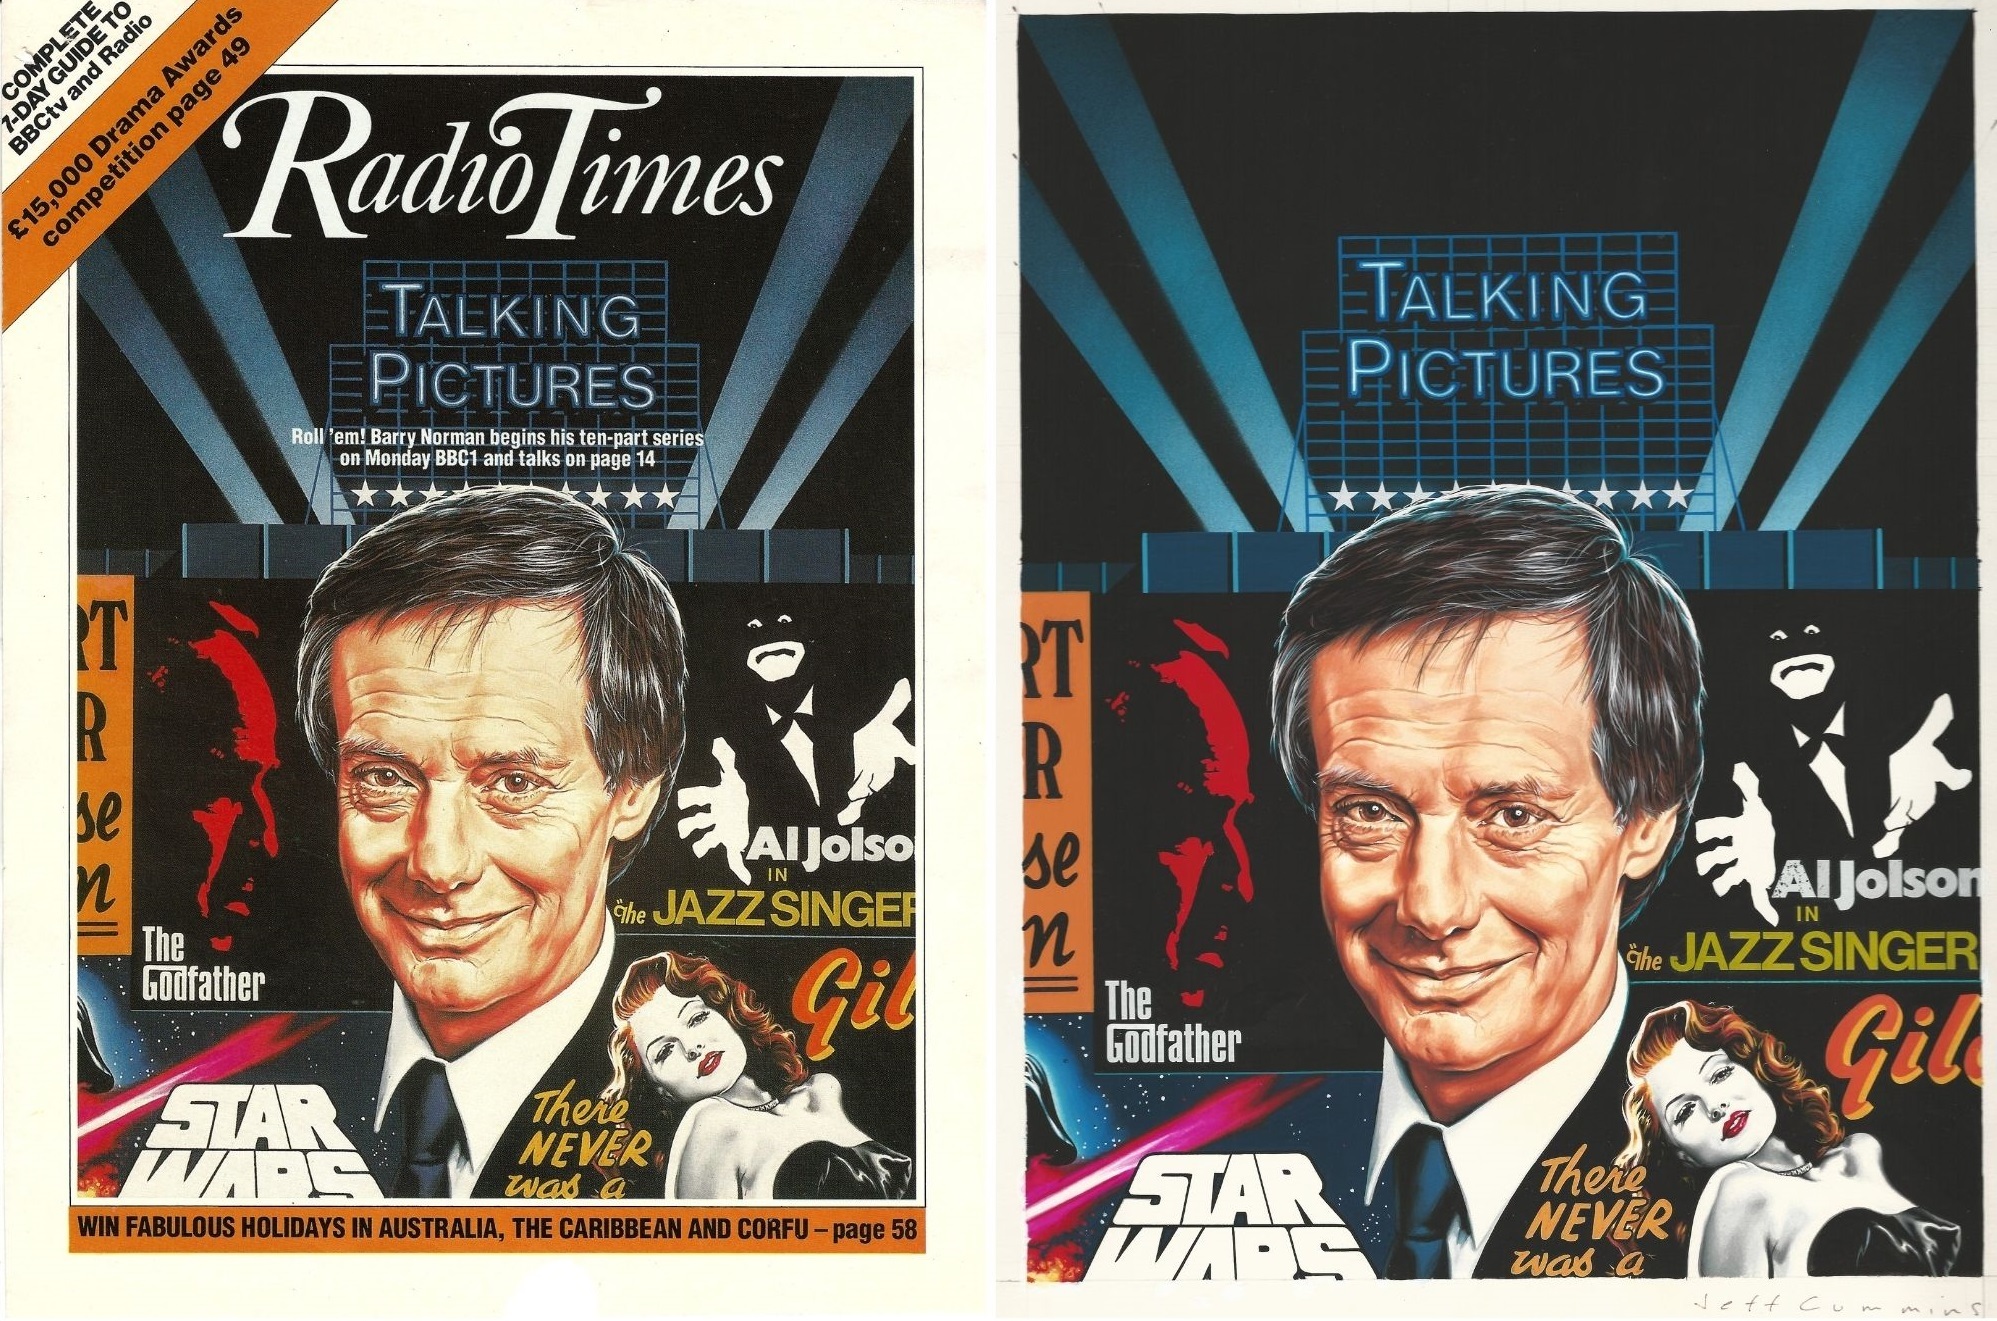 Original Radio Times artwork and cover by Jeff Cummins